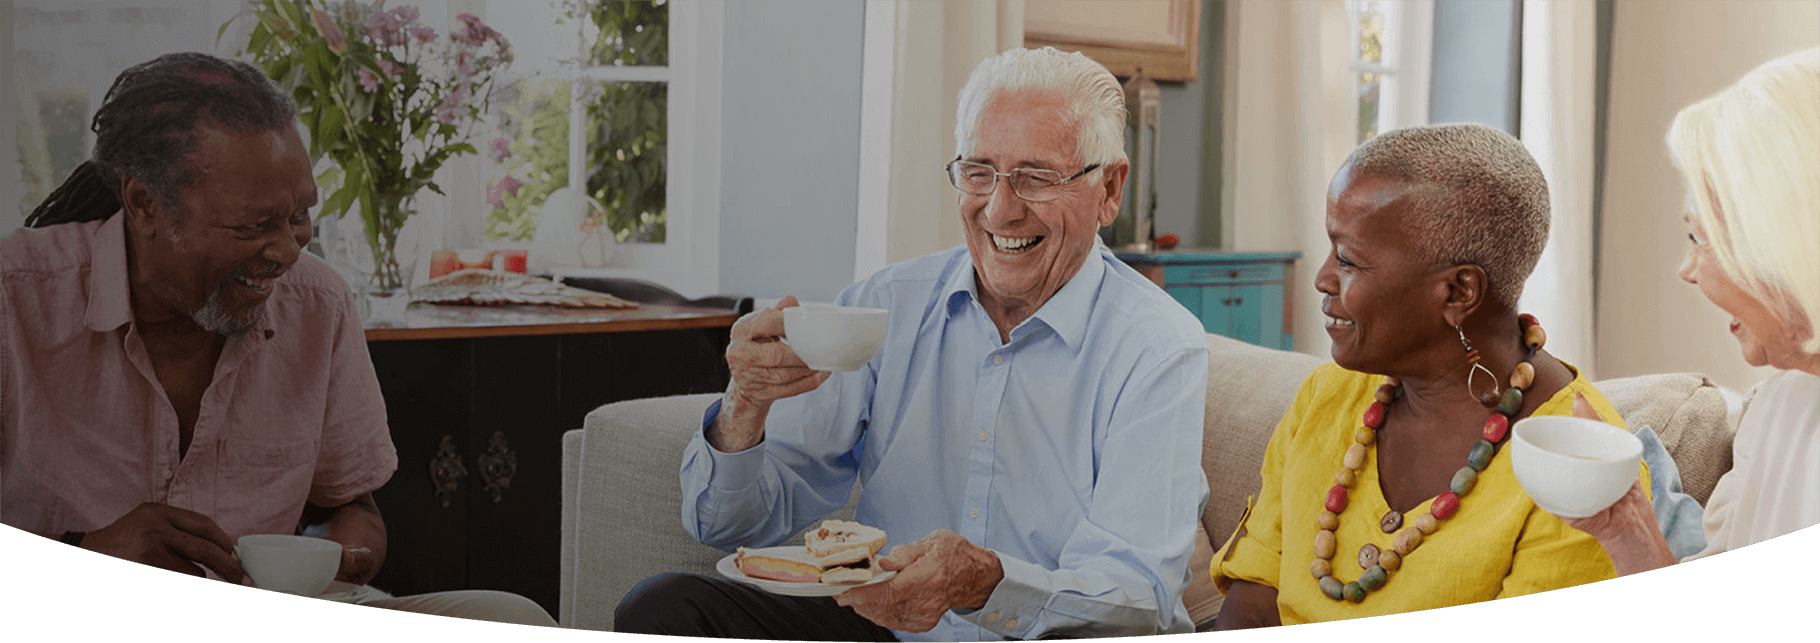 A group of elderly people chatting and laughing over a cup of tea